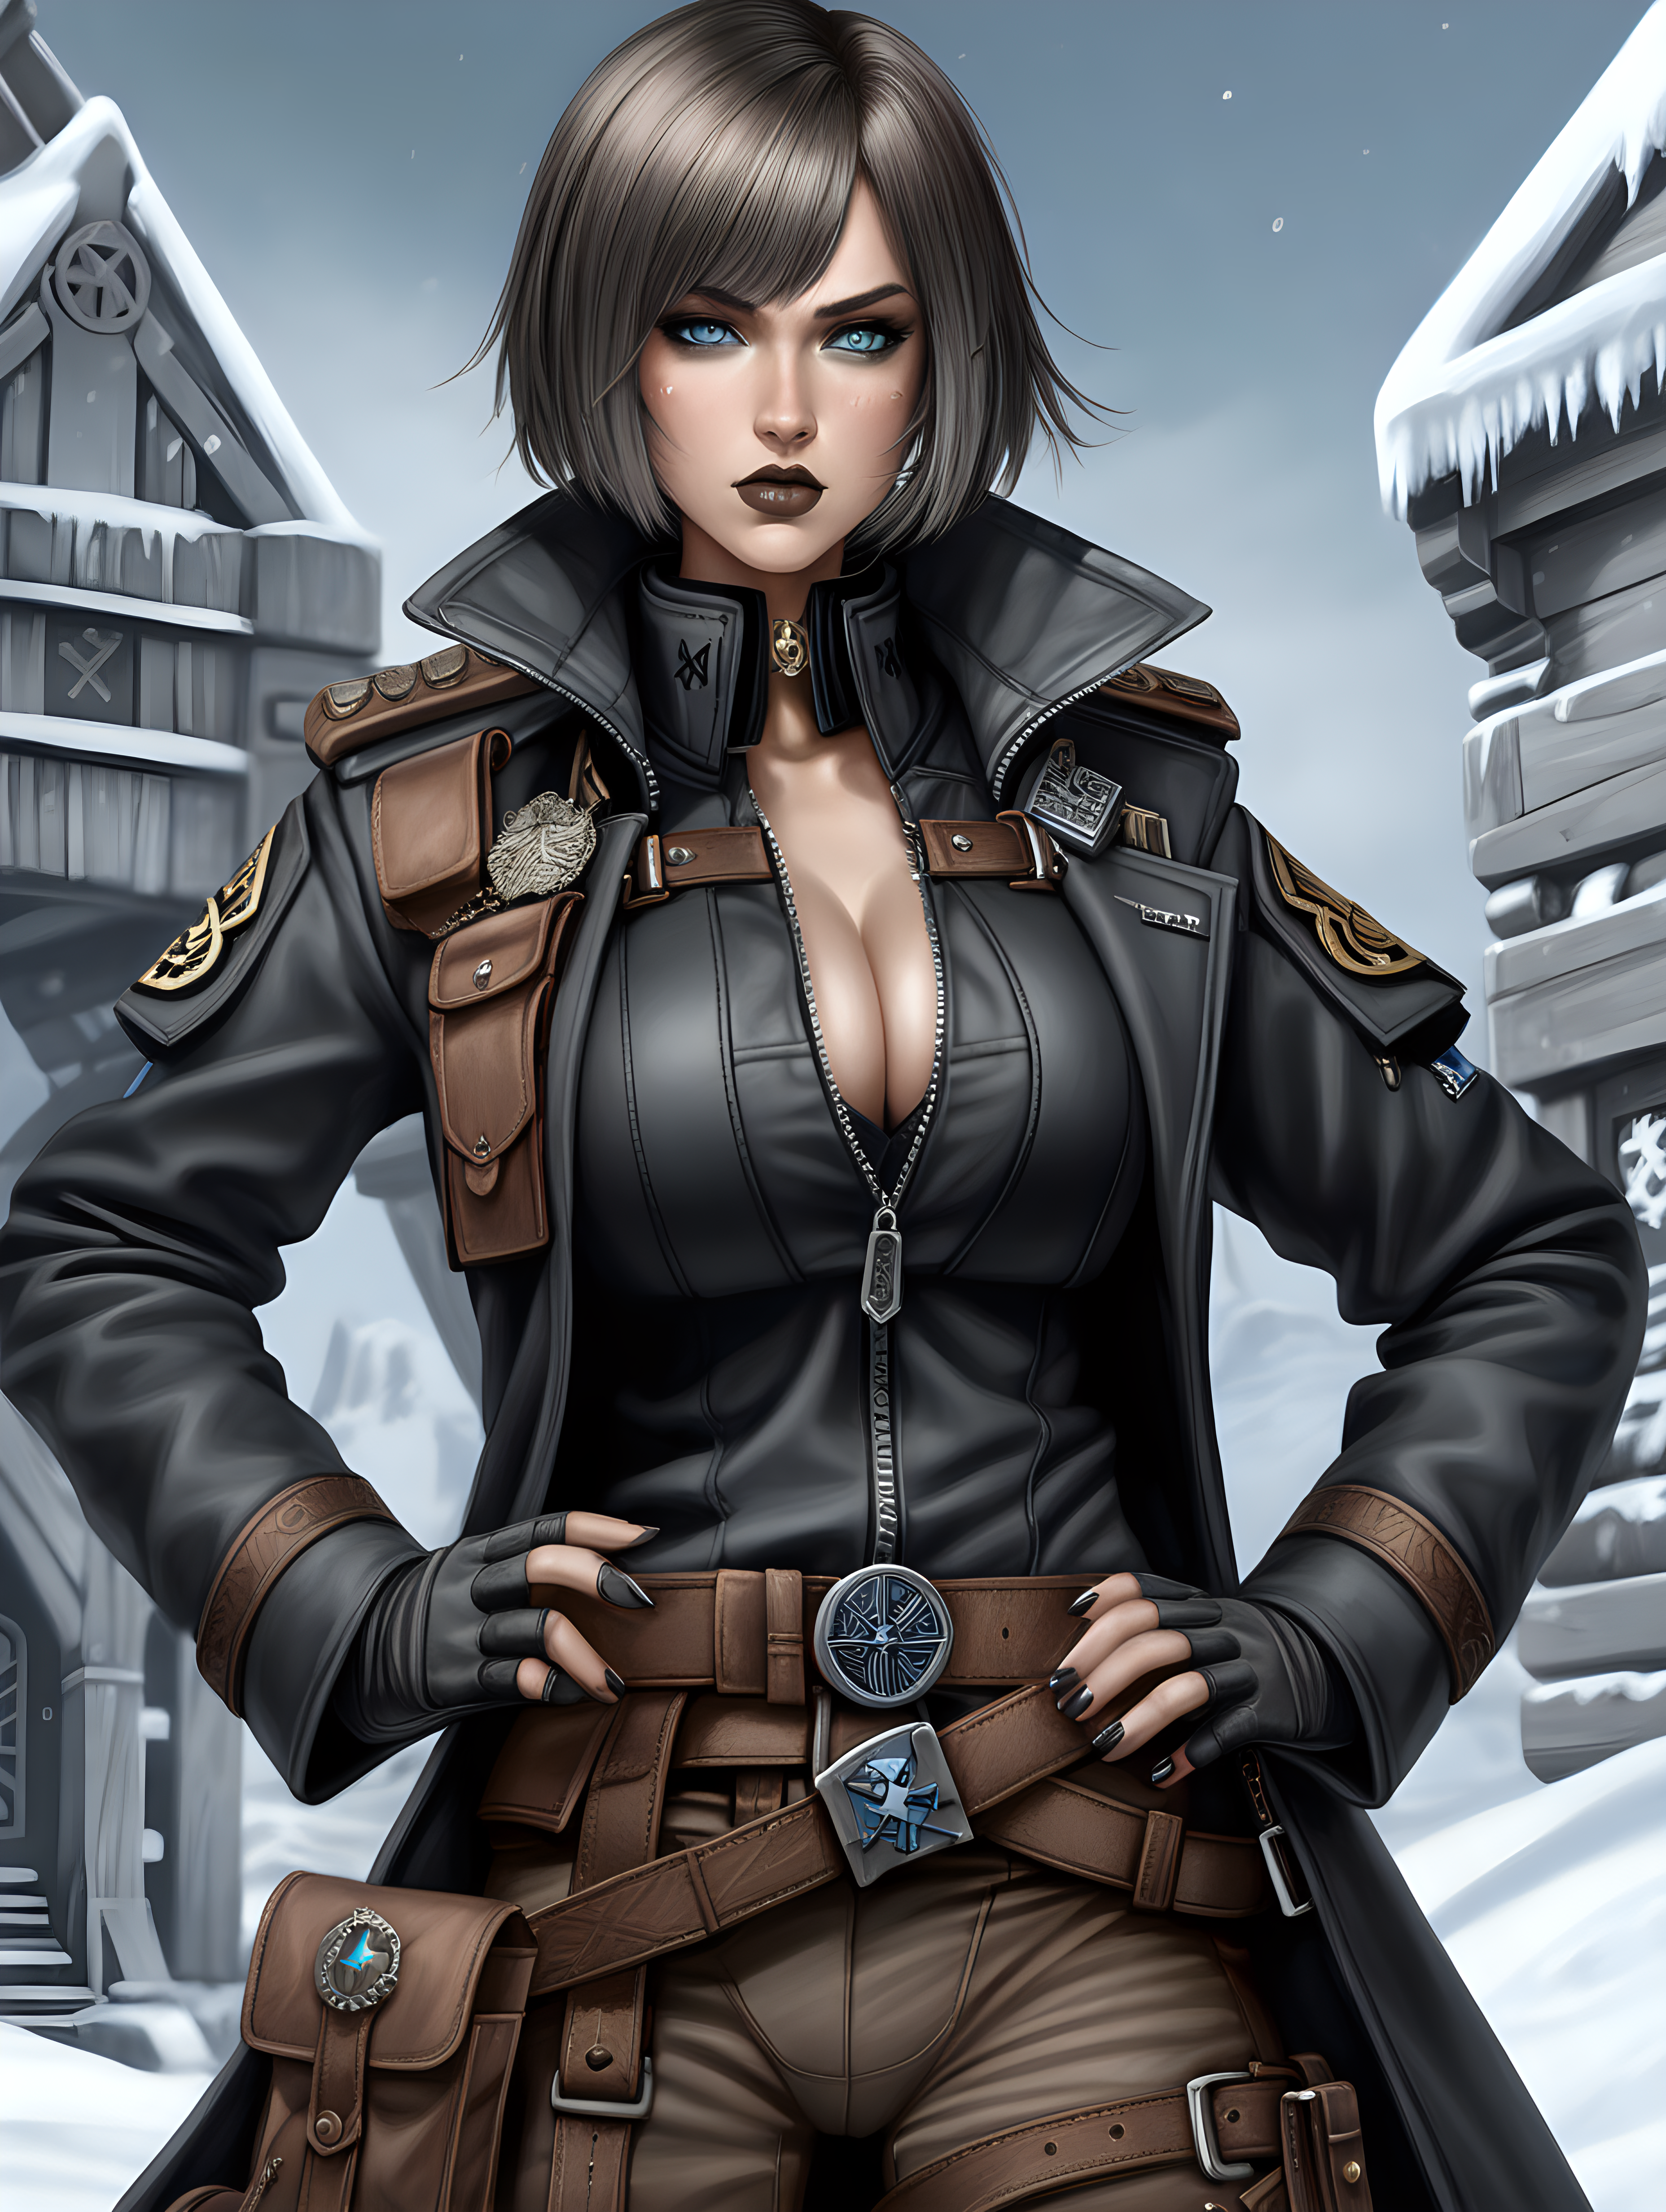 Warhammer 40K young very busty Commissar woman. She has an hourglass shape. She has a very short hair style similar to what Maya, from Borderlands 2, has. Dark black uniform. Dark brown belt has a lot of pouches, grenades, and a black holster attached. Dark brown bandolier around waist. Her dark black uniform jacket fits perfectly and is closed up. She has a lot of eye shadow. Background scene is snowy trench line. She has icy blue eyes. Her uniform has Norse runes. She is wearing warm clothes. Valk nut rune is on collar of her black jacket. She has slightly faded greyish matte lipstick. She has faded brown hair with grey hair tip highlights. She is wearing skin tight mud brown colored pants.